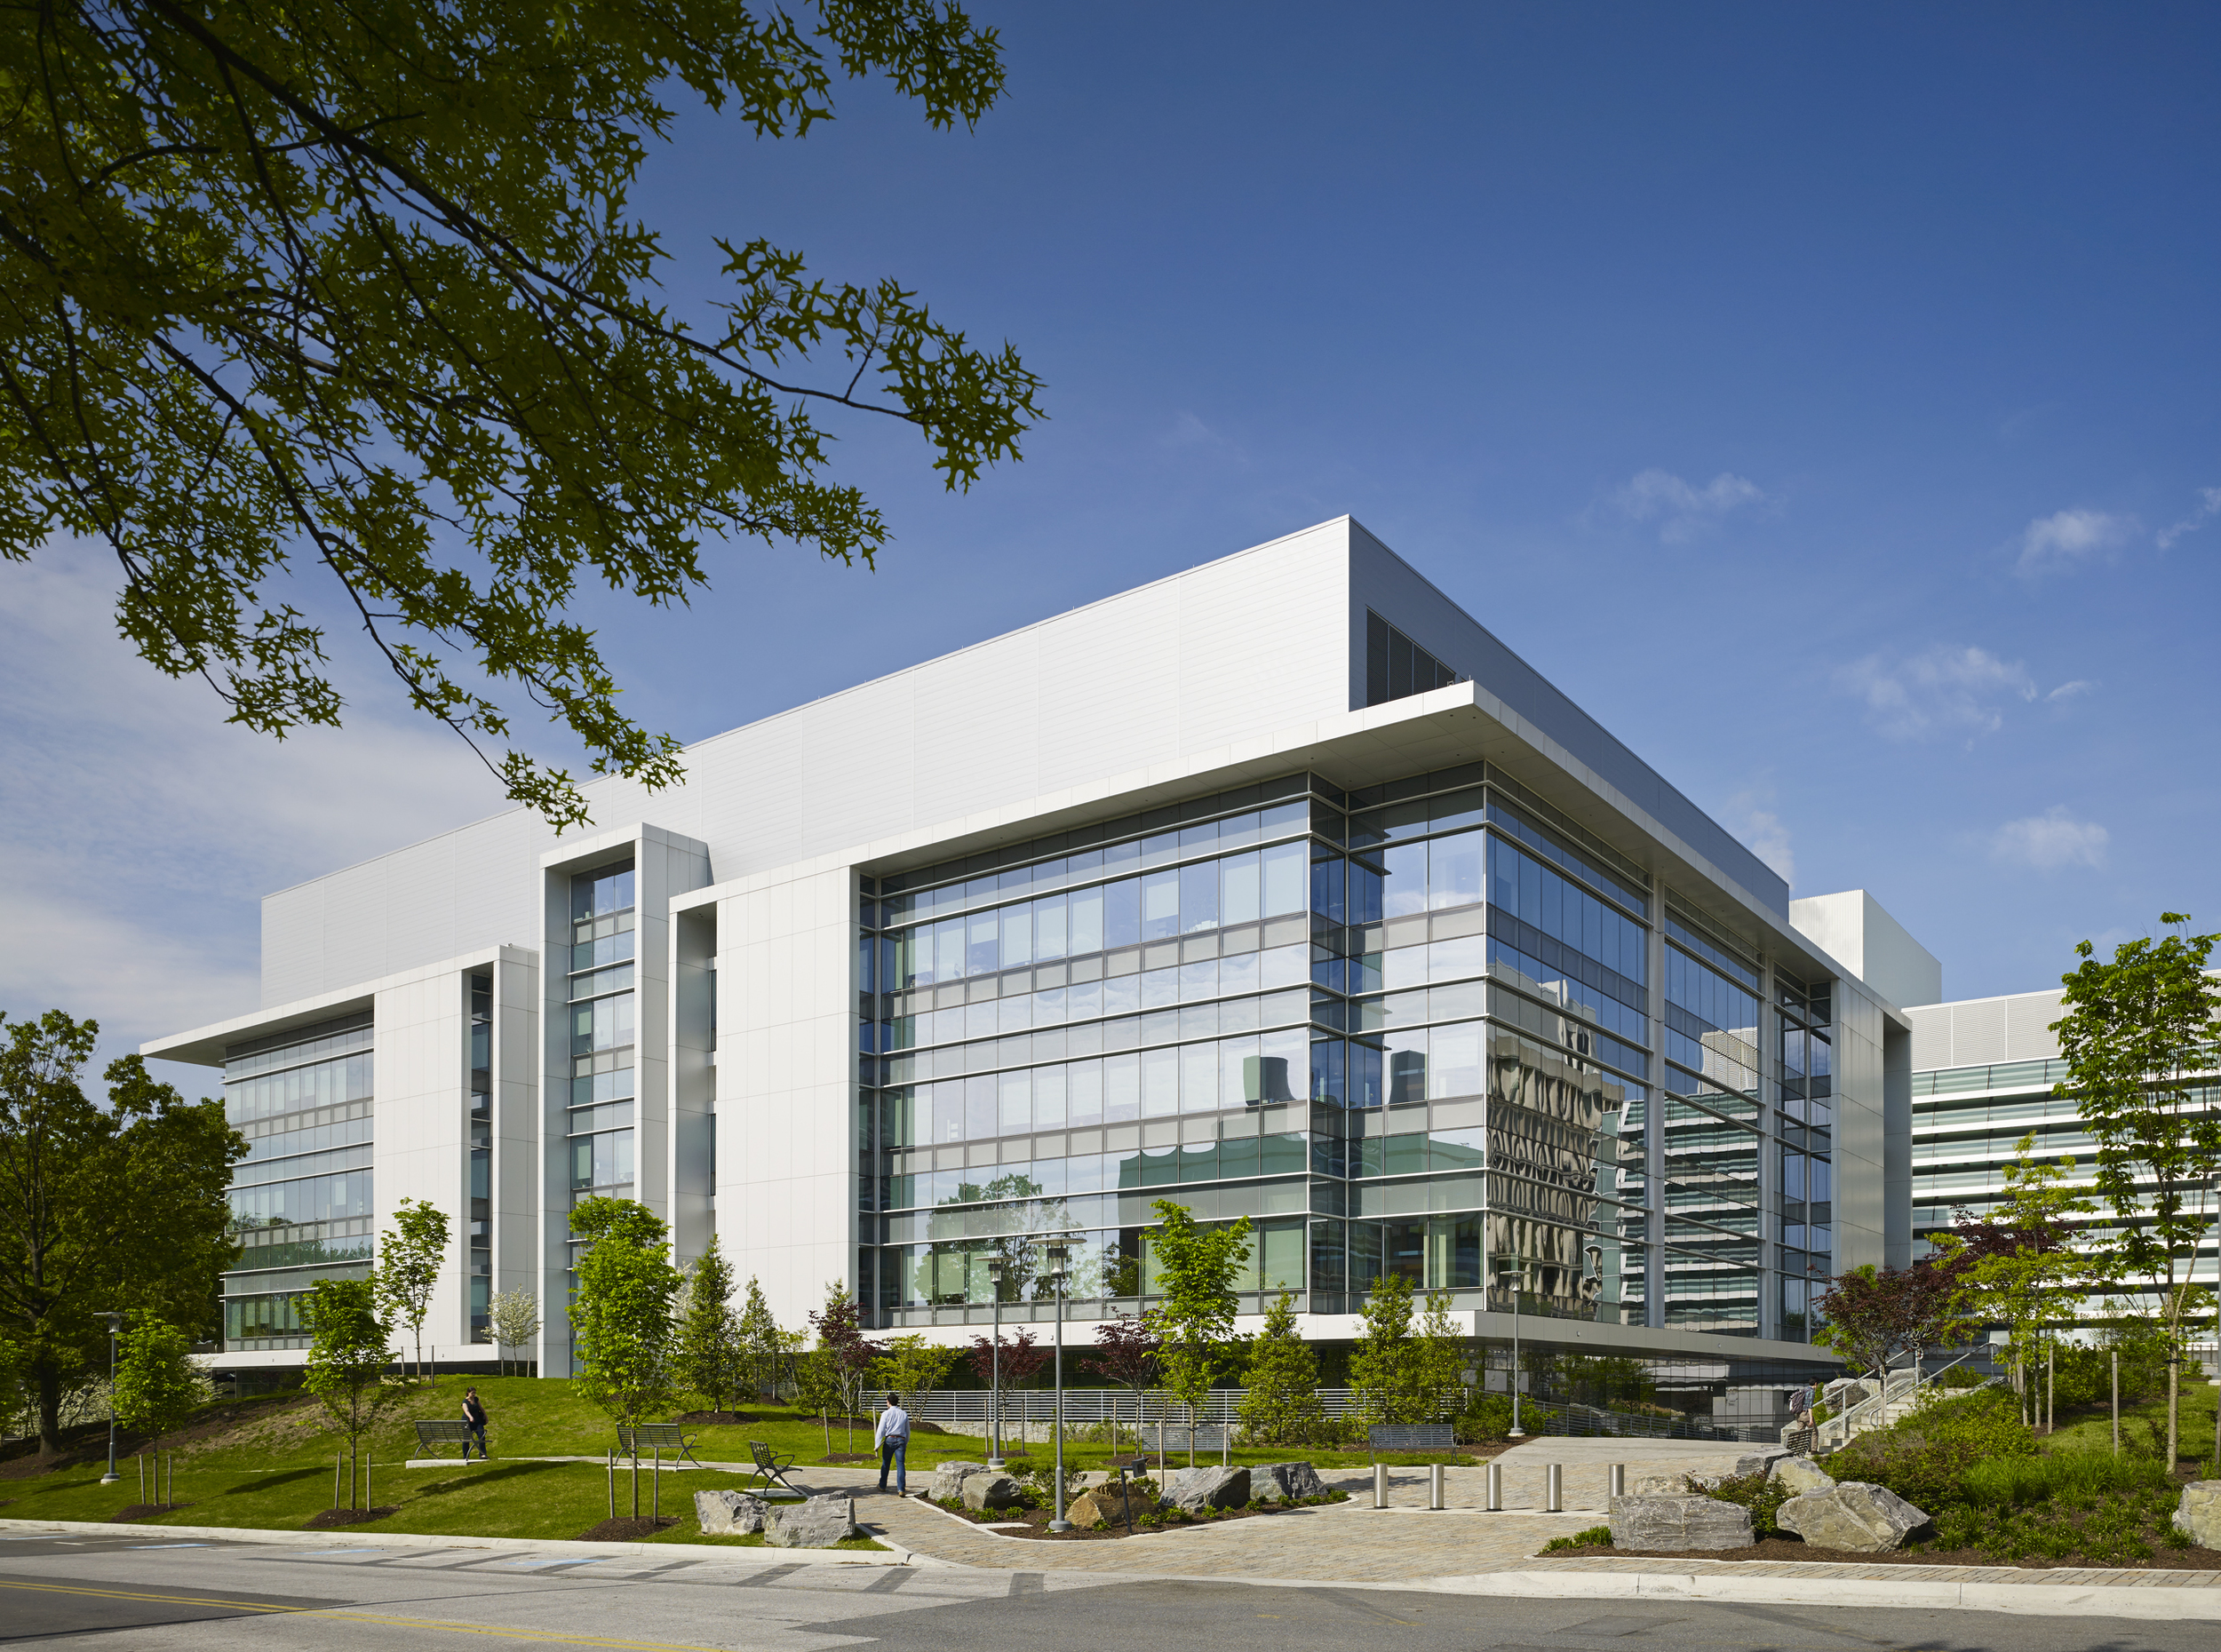  NIH Neuroscience Research Center  Perkins+Will  Bethesda, Maryland      Return to Projects  